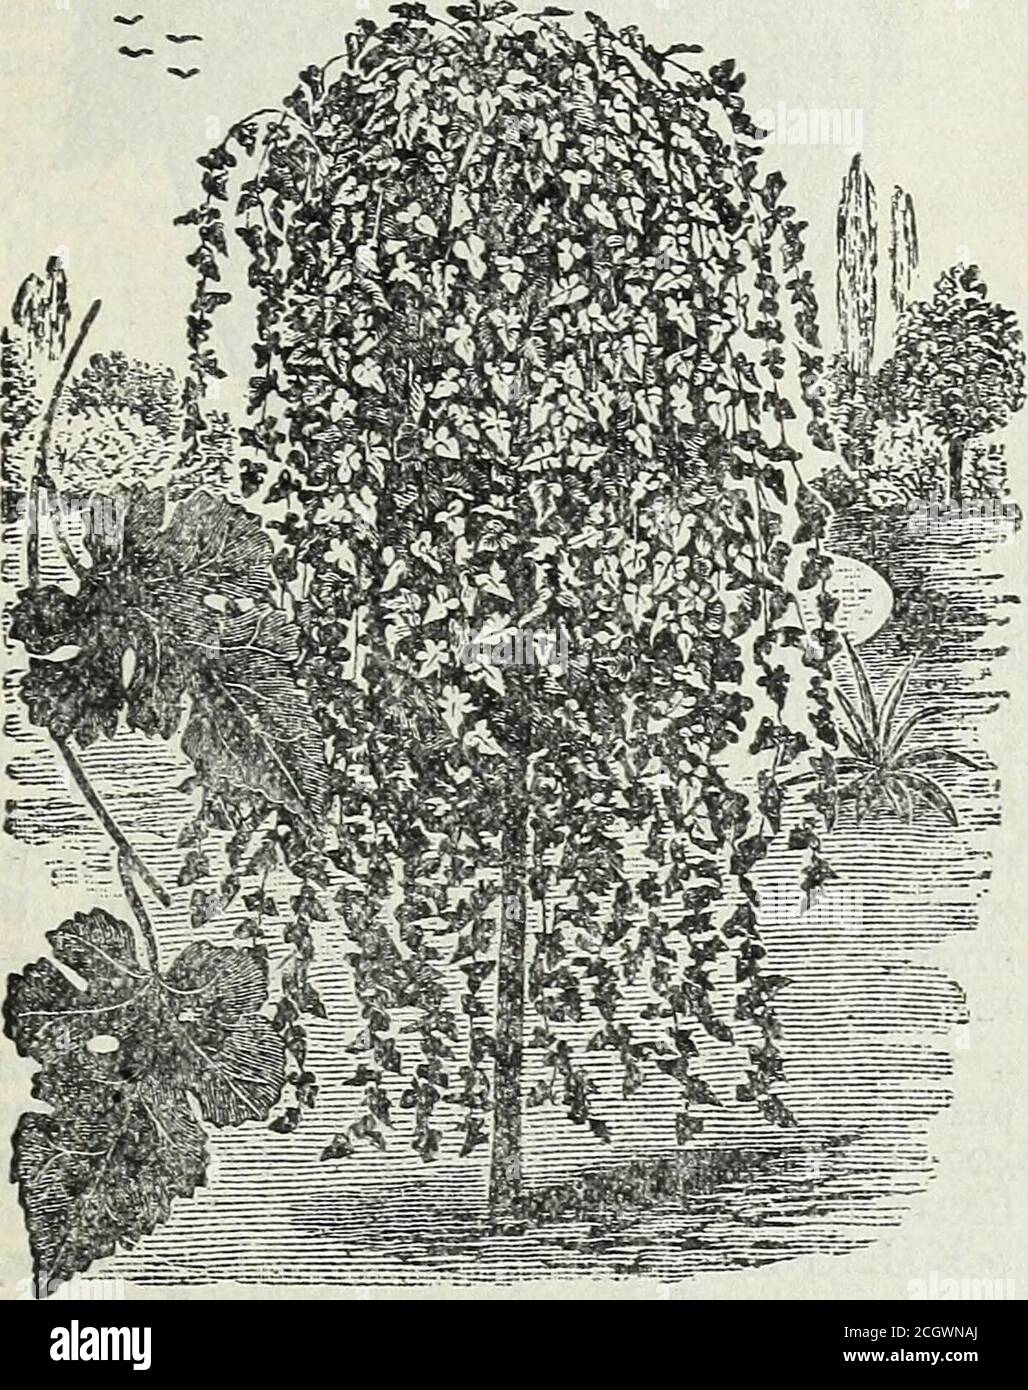 . Steckler's seeds : 1905 . id growth. 5 feet, 50c.each, $5.00 per dozen; 7 feet, 75c. each,$6.00 per dozen. Extra large trees, $1.00,$1.25, $1.50 and $2.50 each. Price of seed, 1-4 lb. 15c., 1-2 lb. 25c, ilb qoc KILMARNOCK WEEPING WIL-LOW. A variety of the Goat Willow orcommon Sallow. Grafted five to sevenfeet high upon the Comewell stock. Itforms without any trimming, an exceeding-ly graceful tree, with glossy foliage and White Fautail Pigeons, ^3-co ttr Pair. GARDEN MANUAL FOR THE S»lTHEn&gt;f STATES. perfect umbrella head, unique in form.Vigorous and thriving in all soils, it isprobably mo Stock Photo